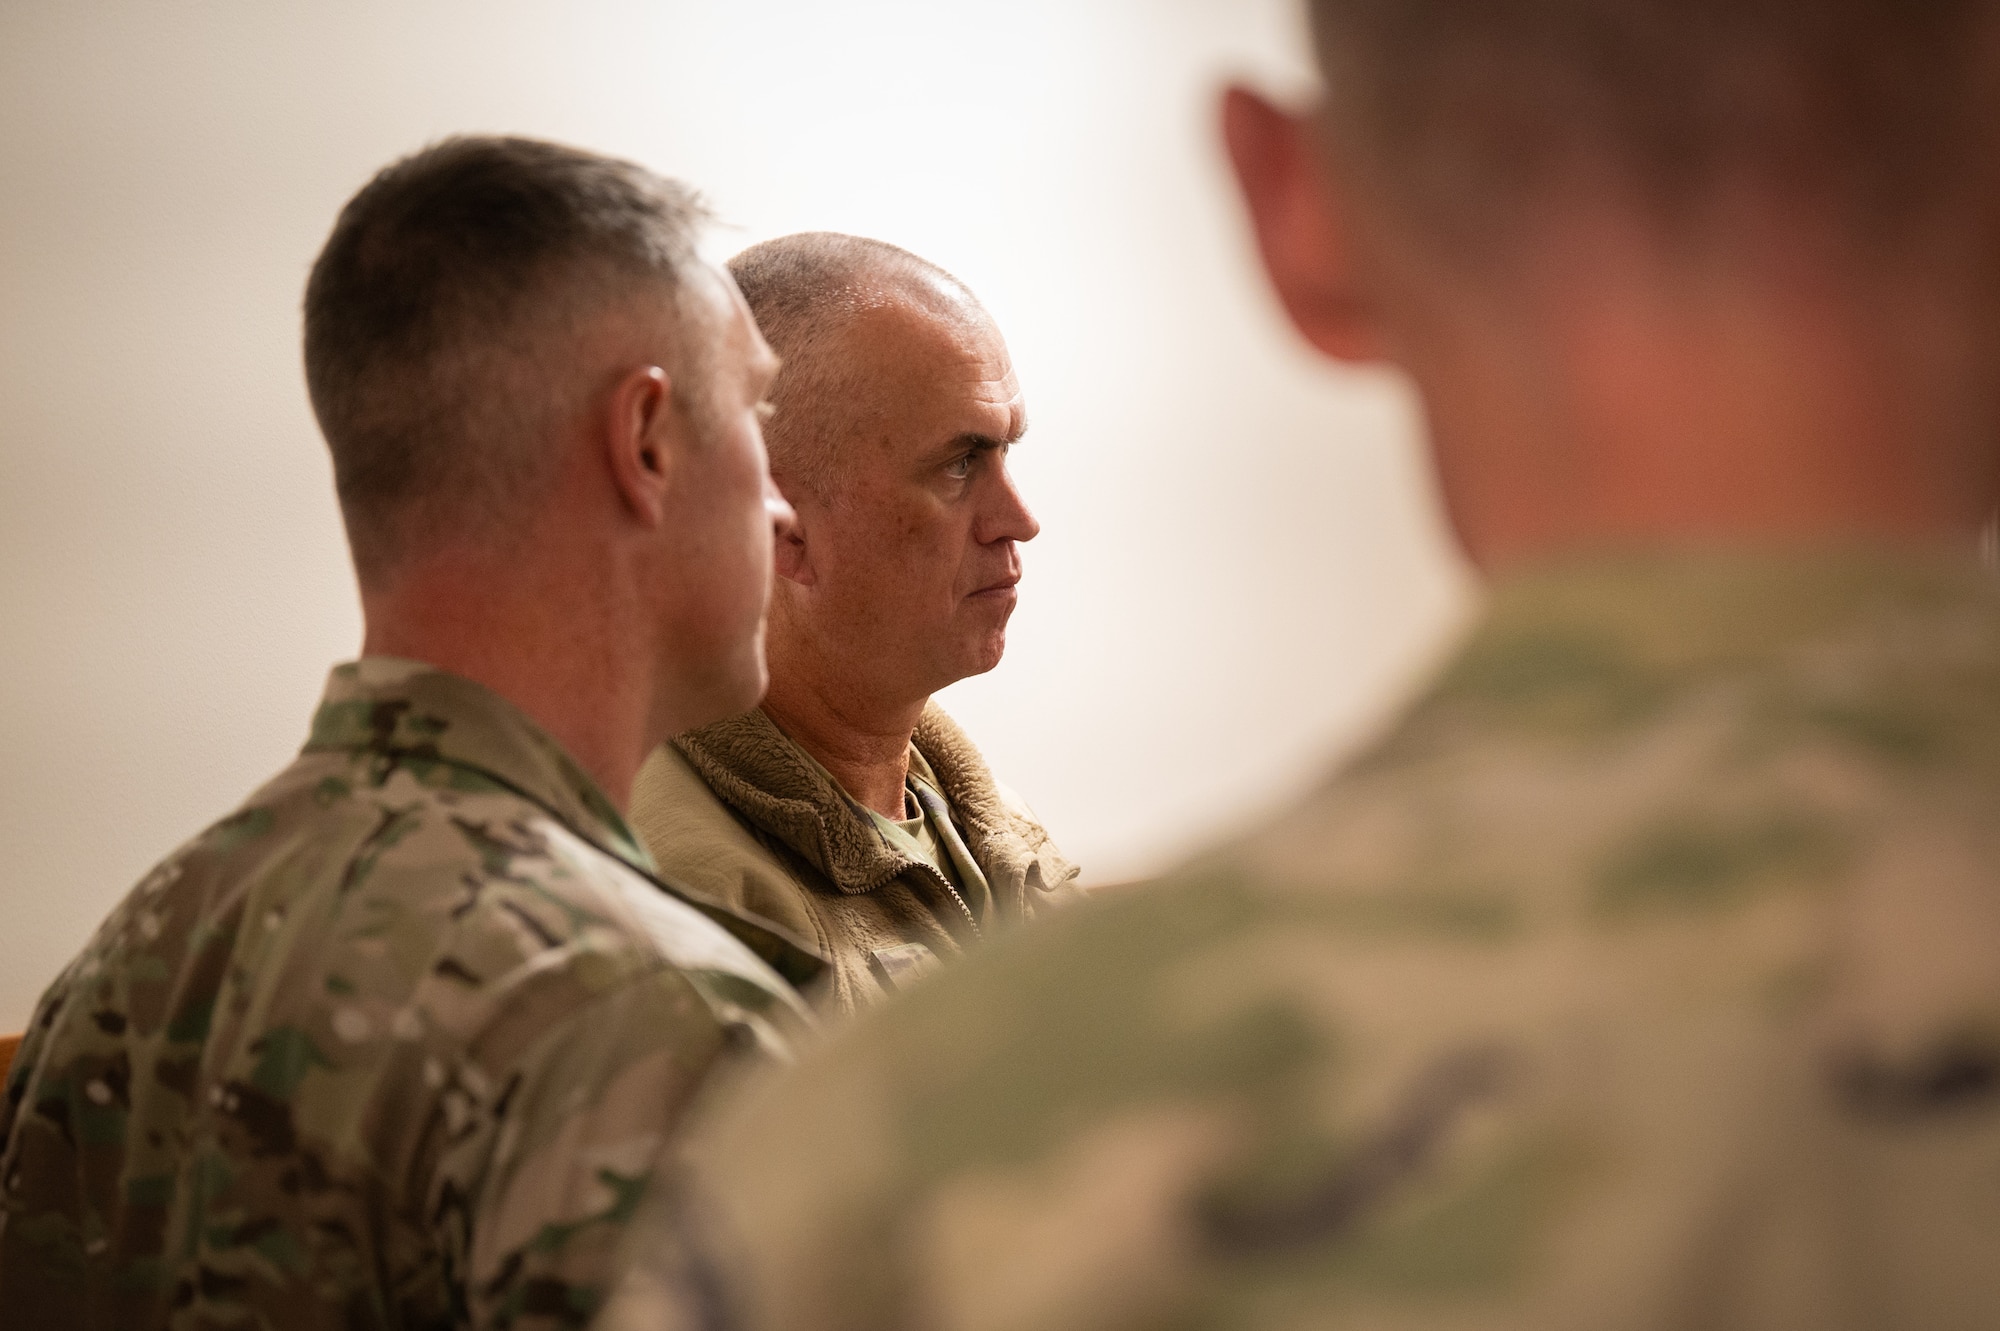 The side profile of a man in military uniform is in focus between two others as they talk.